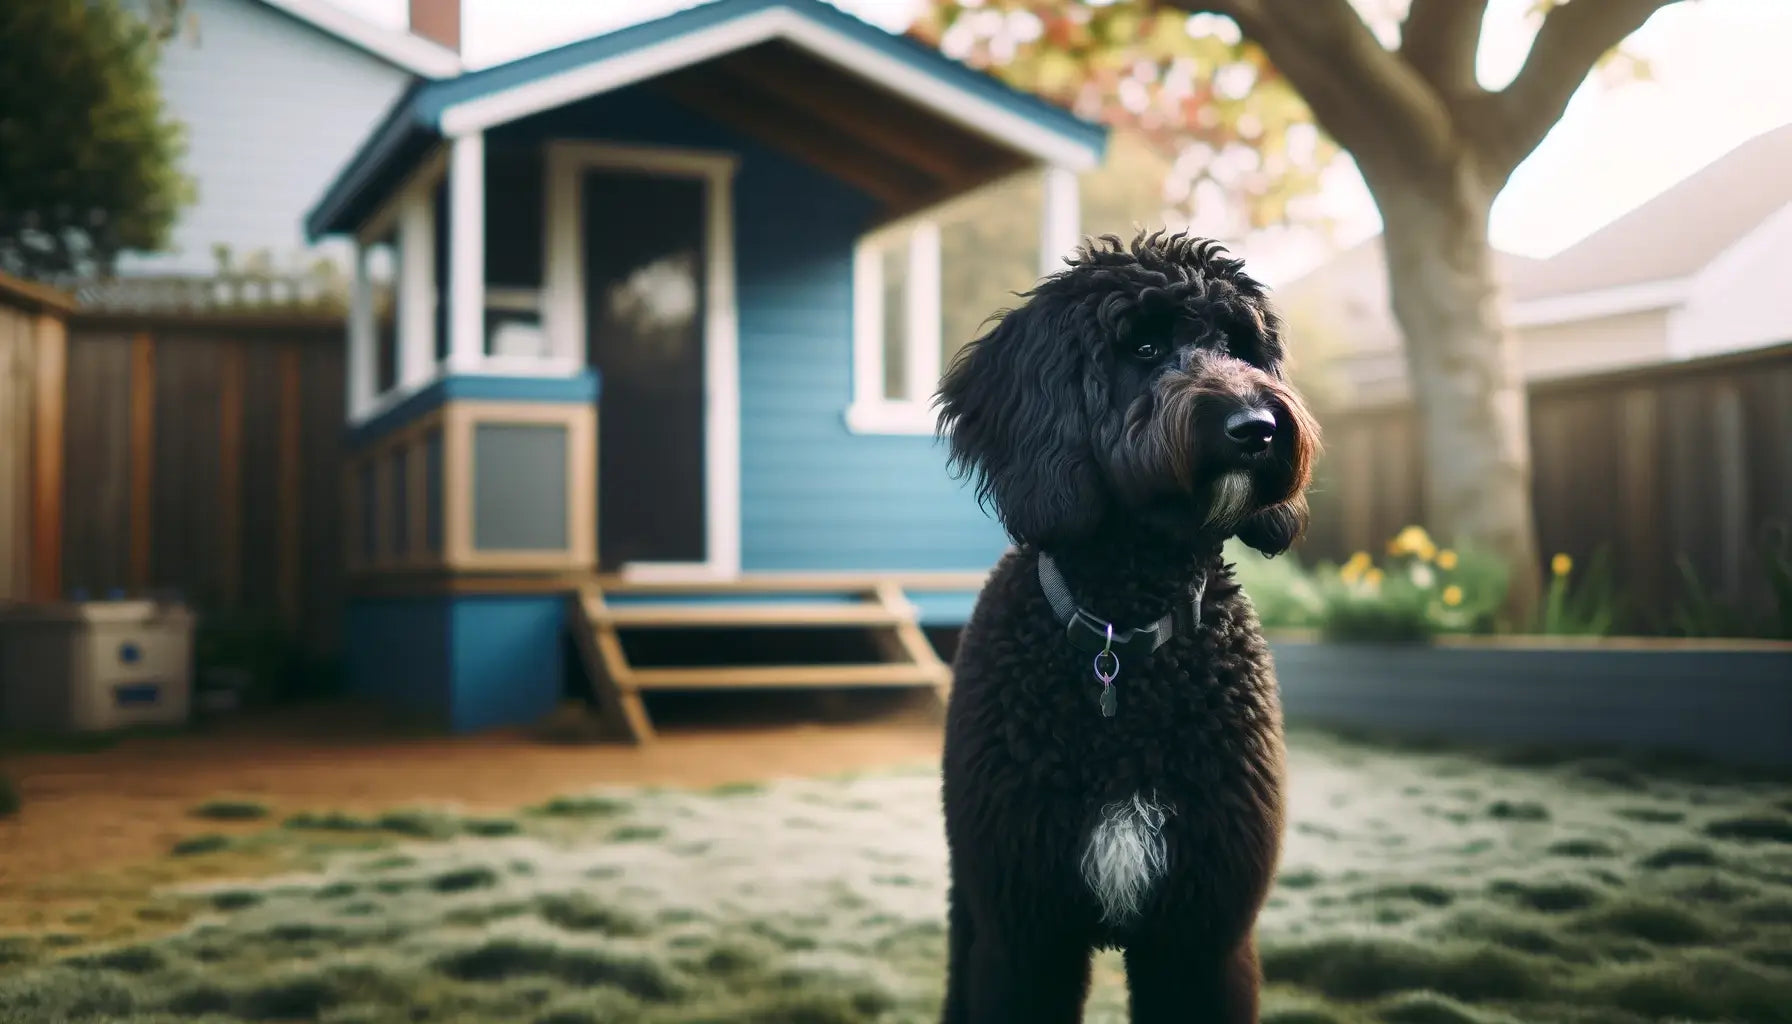 Black Goldendoodle standing in a yard with a blue structure in the background, its coat slightly curly and a collar around its neck.